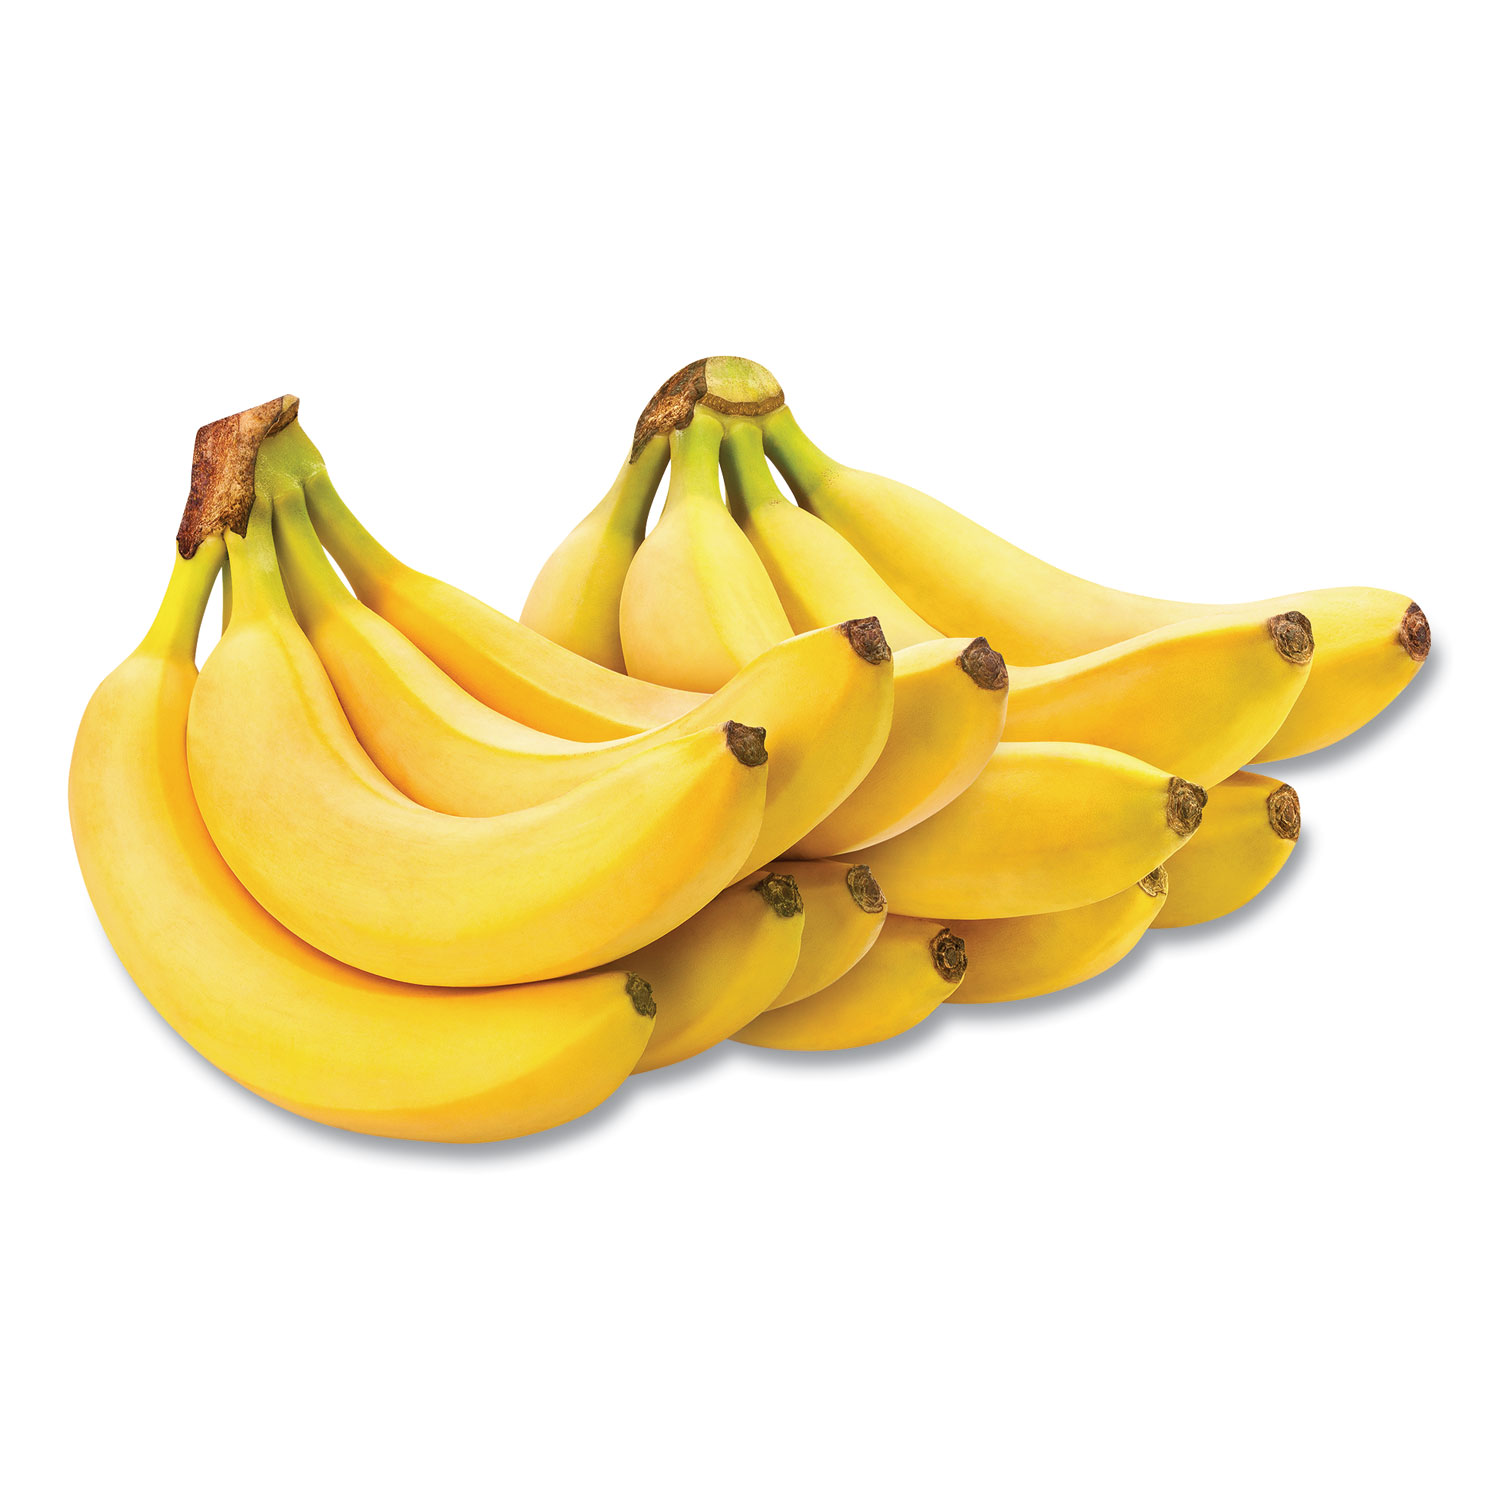  National Brand 362153 Fresh Bananas, 6 lbs, 2 Bundles/Pack, Free Delivery in 1-4 Business Days (GRR90000106) 